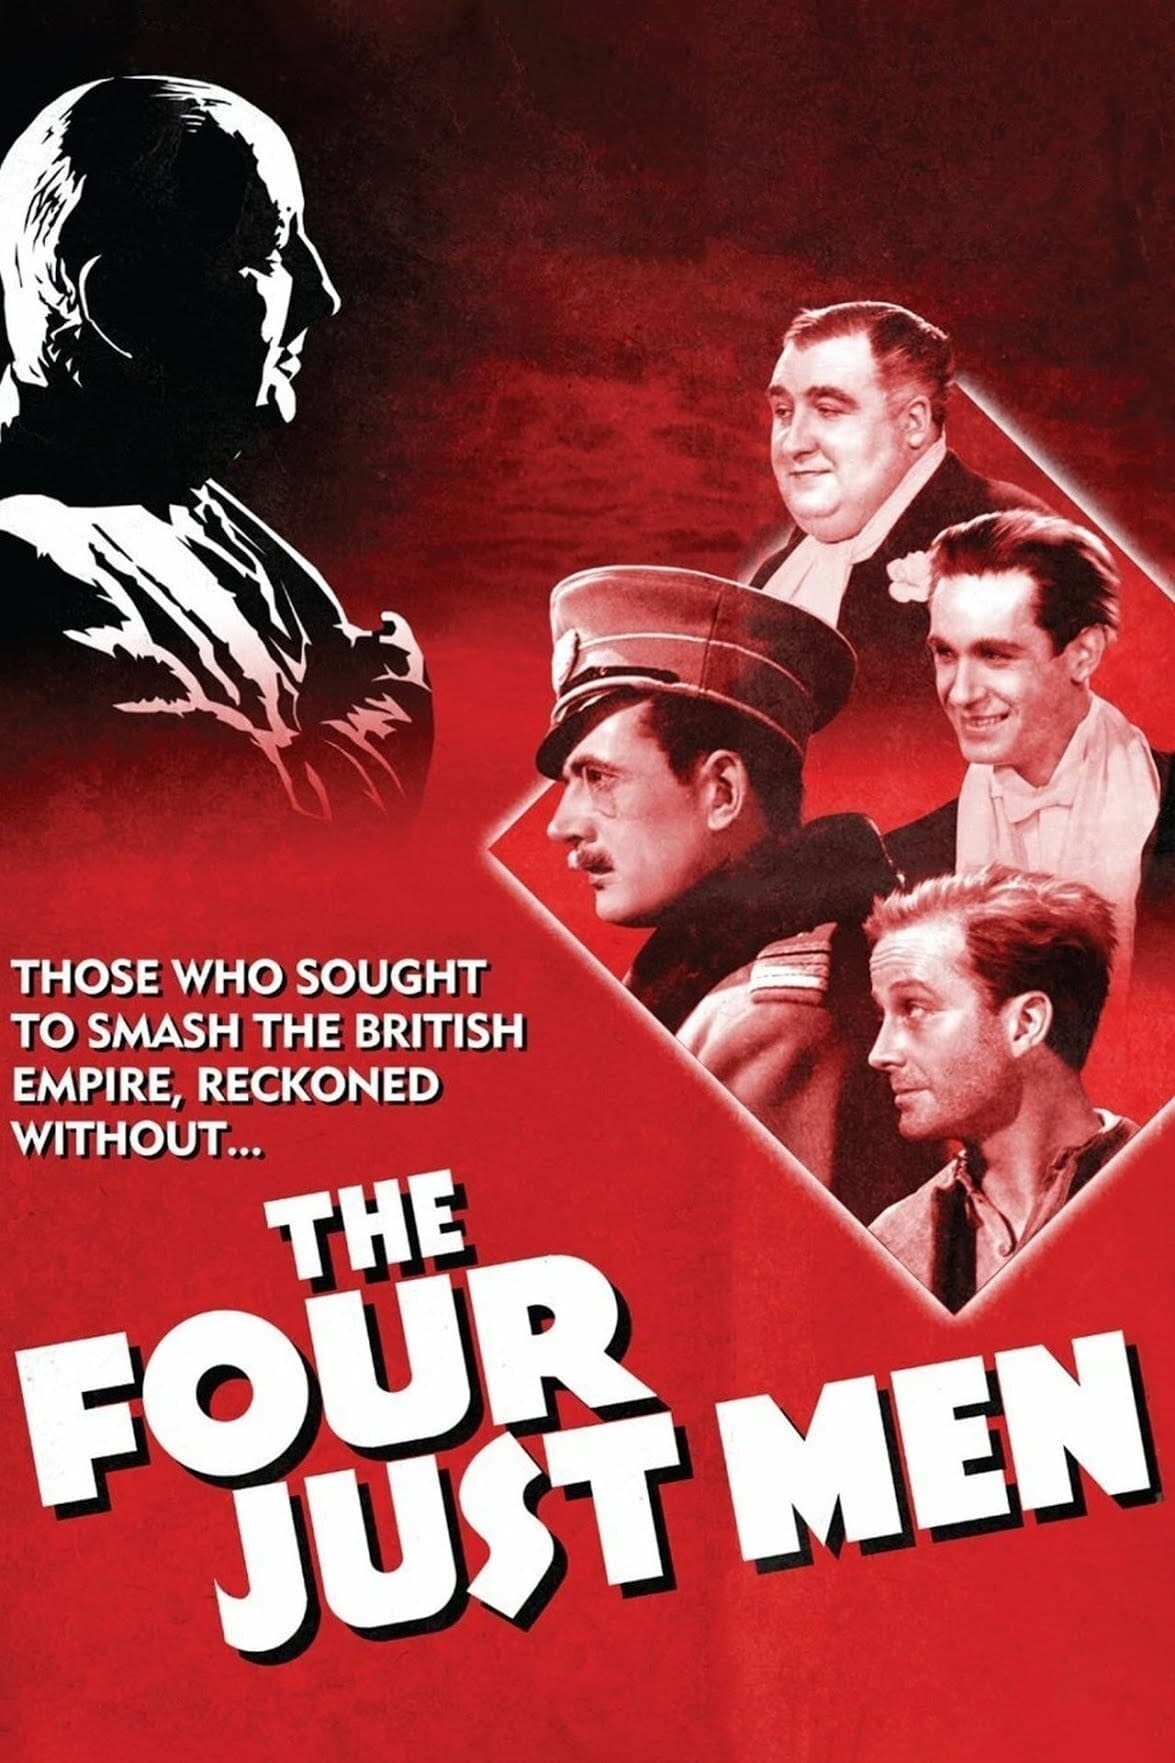 The Four Just Men (1939)